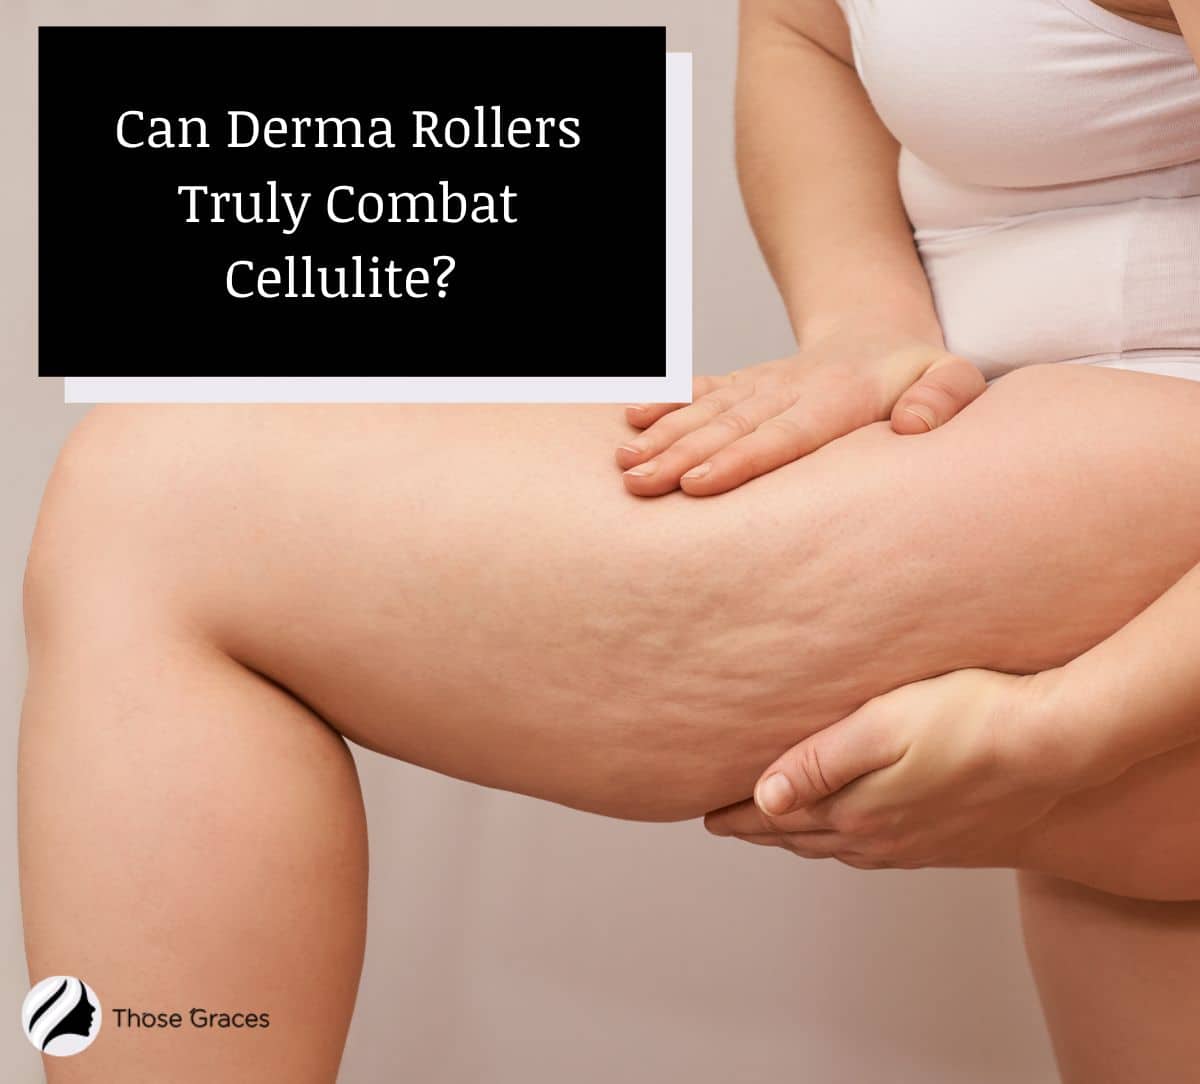 Do Derma Rollers Work for Cellulite